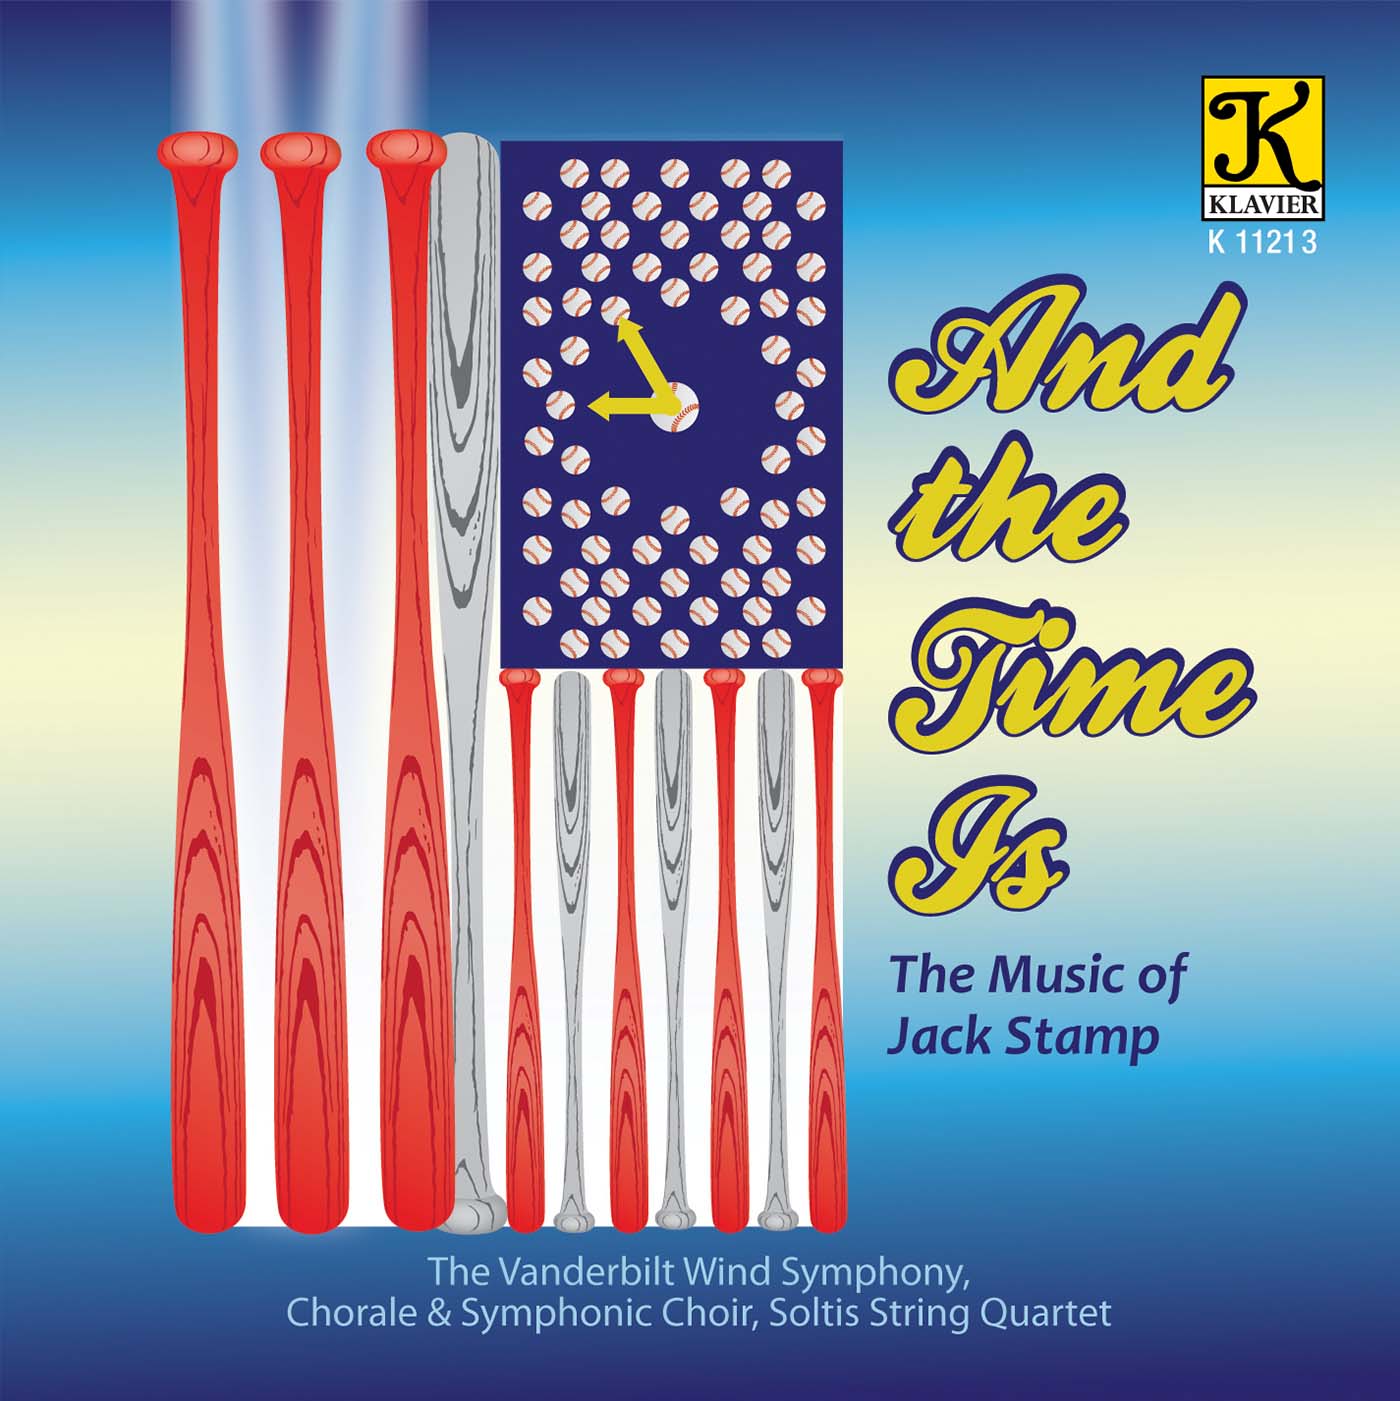 And the Time Is: The Music of Jack Stamp / Vanderbilt Symphonic Choir